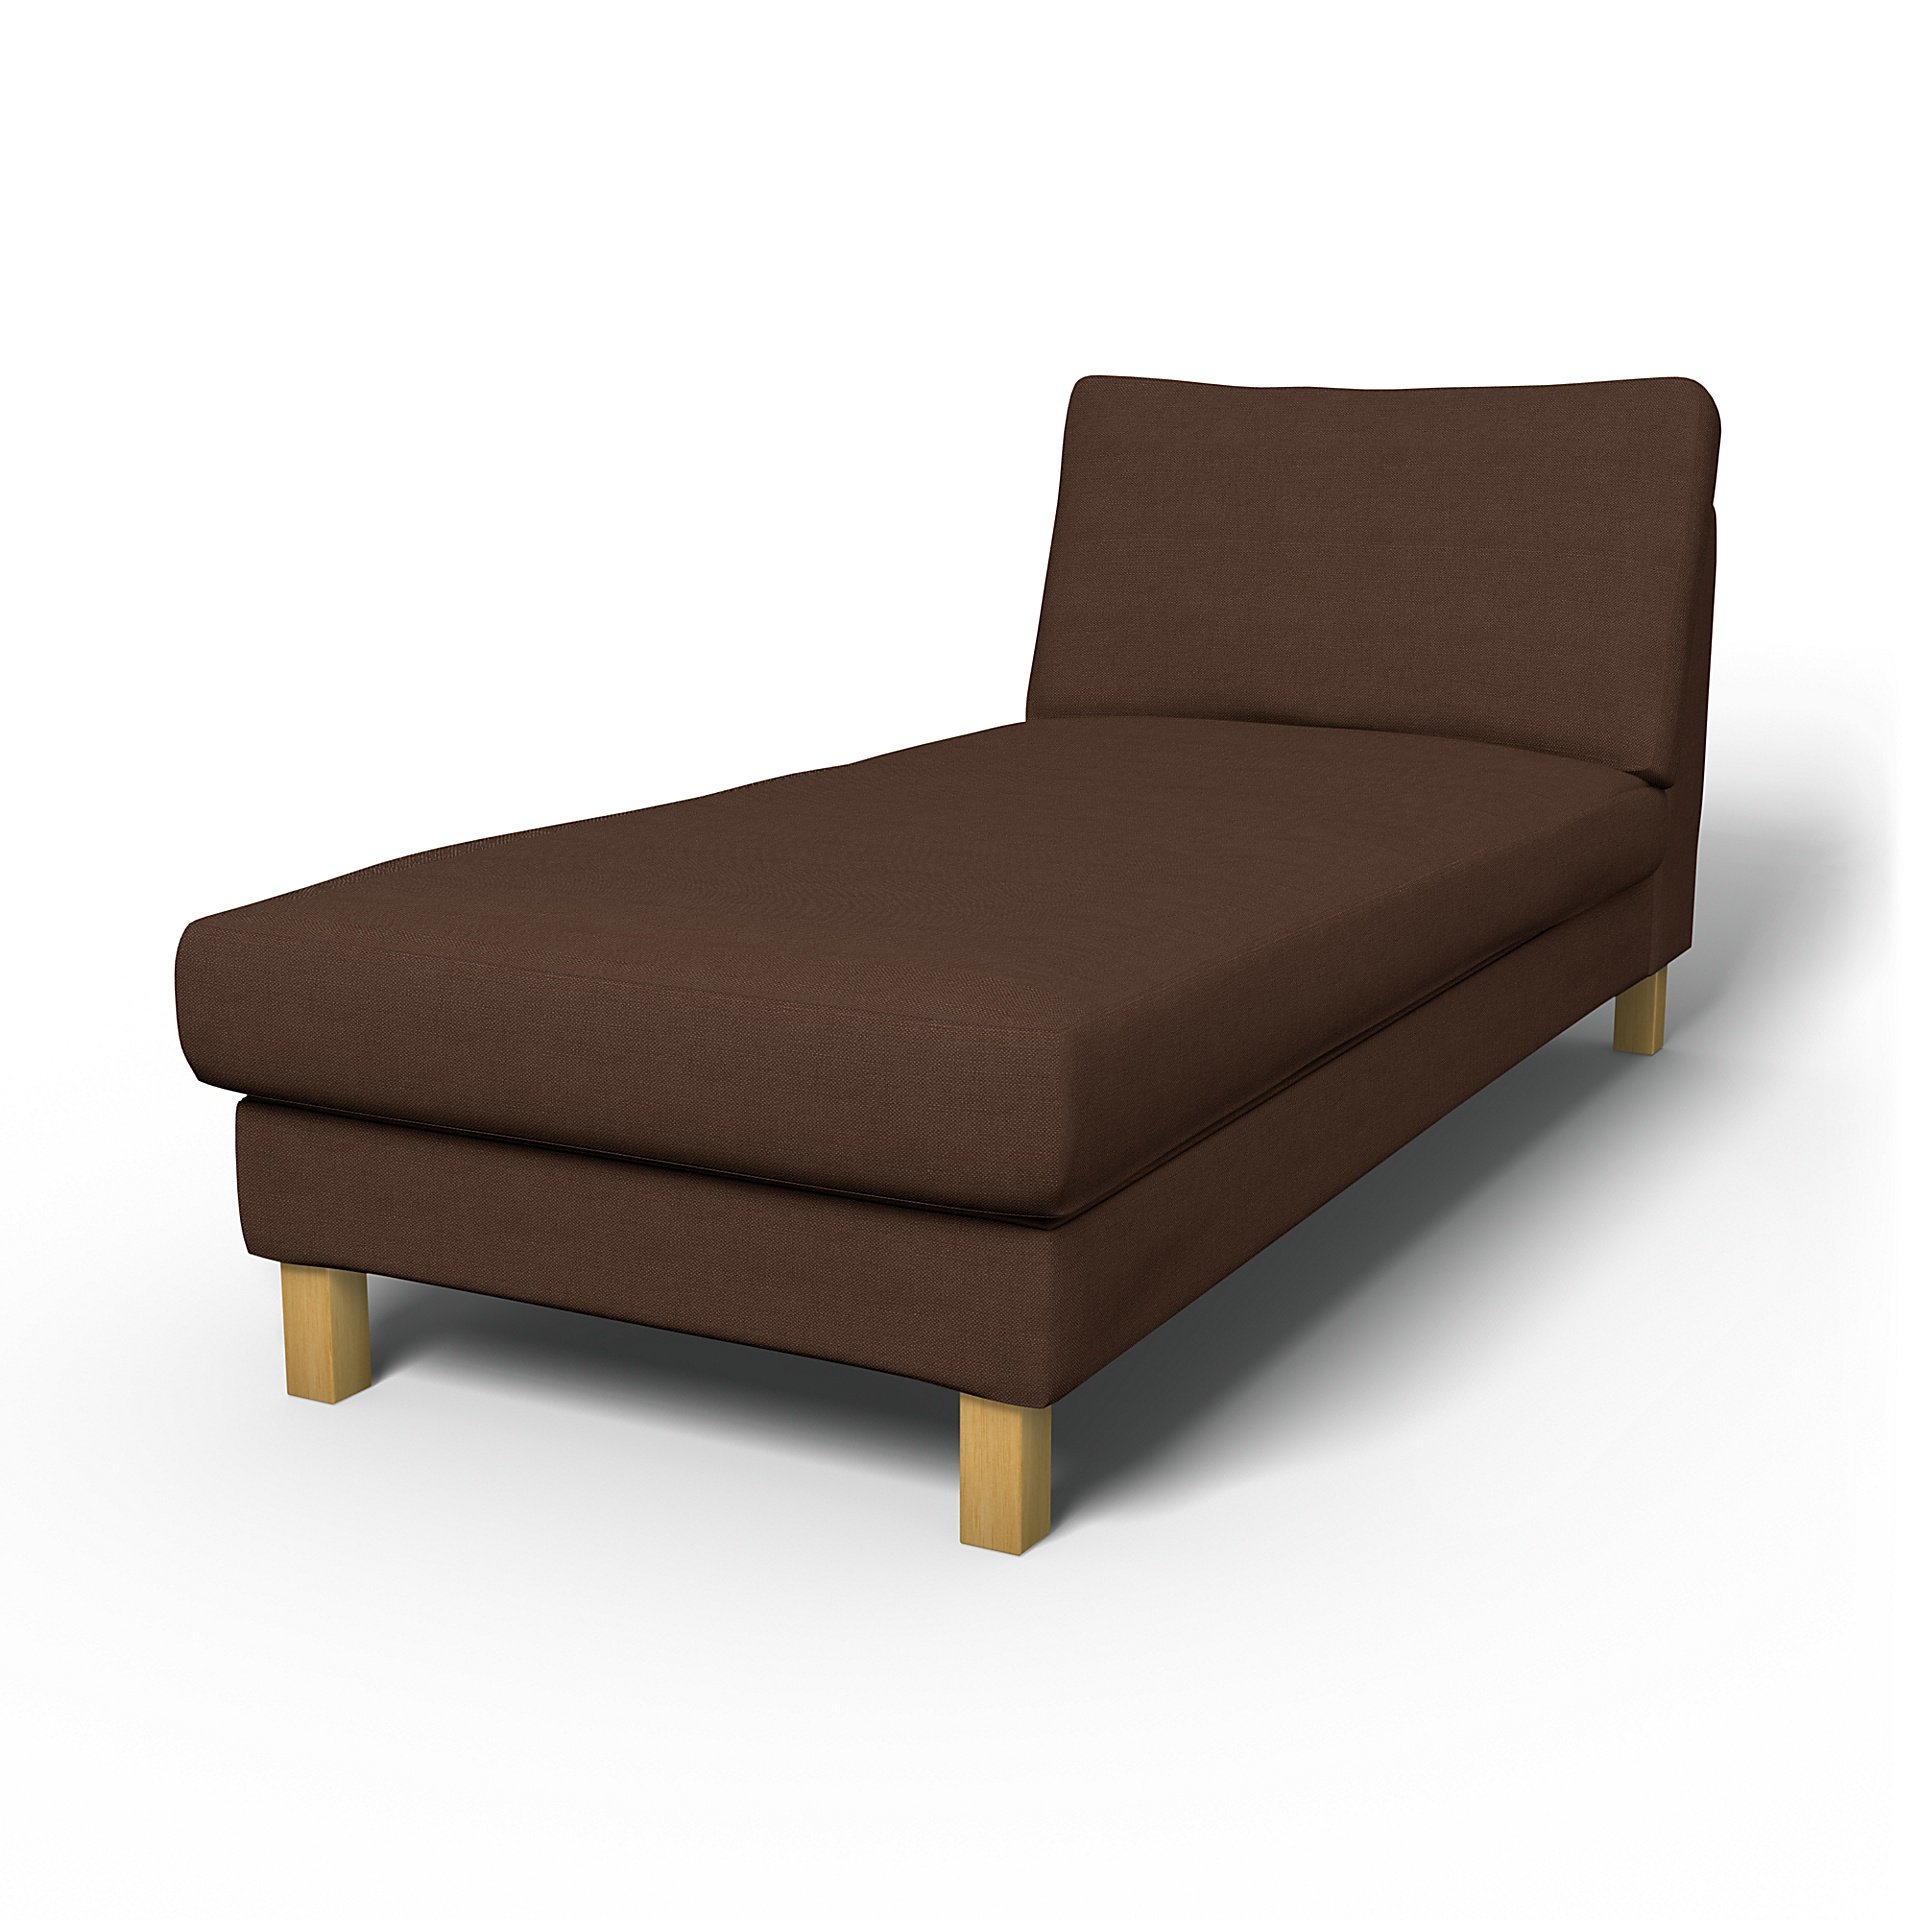 IKEA - Karlstad Stand Alone Chaise Longue Cover, Chocolate, Linen - Bemz